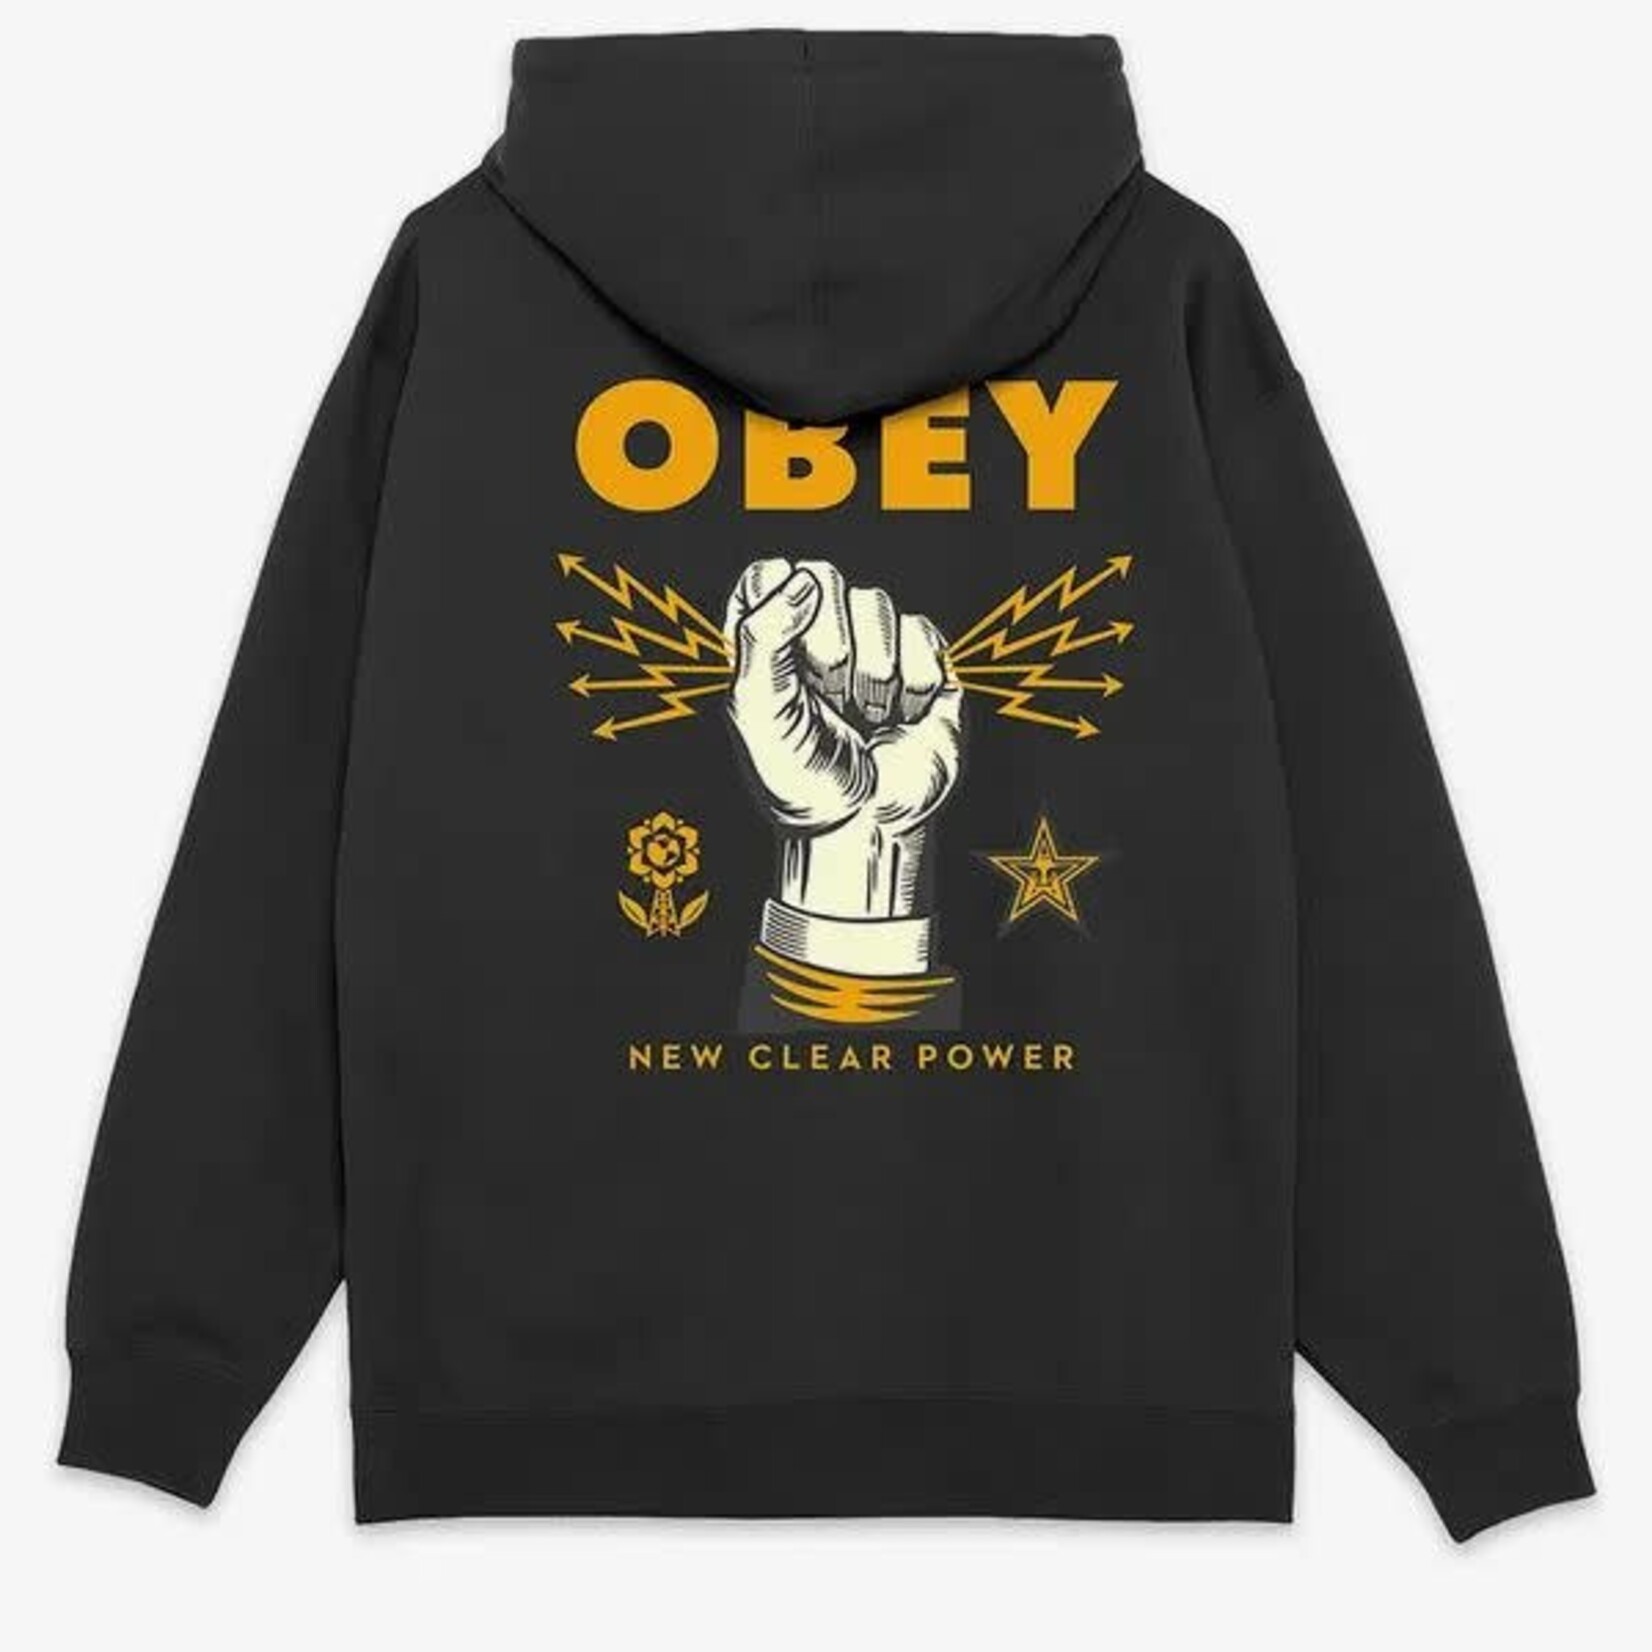 obey Obey hoodie new clear power blk